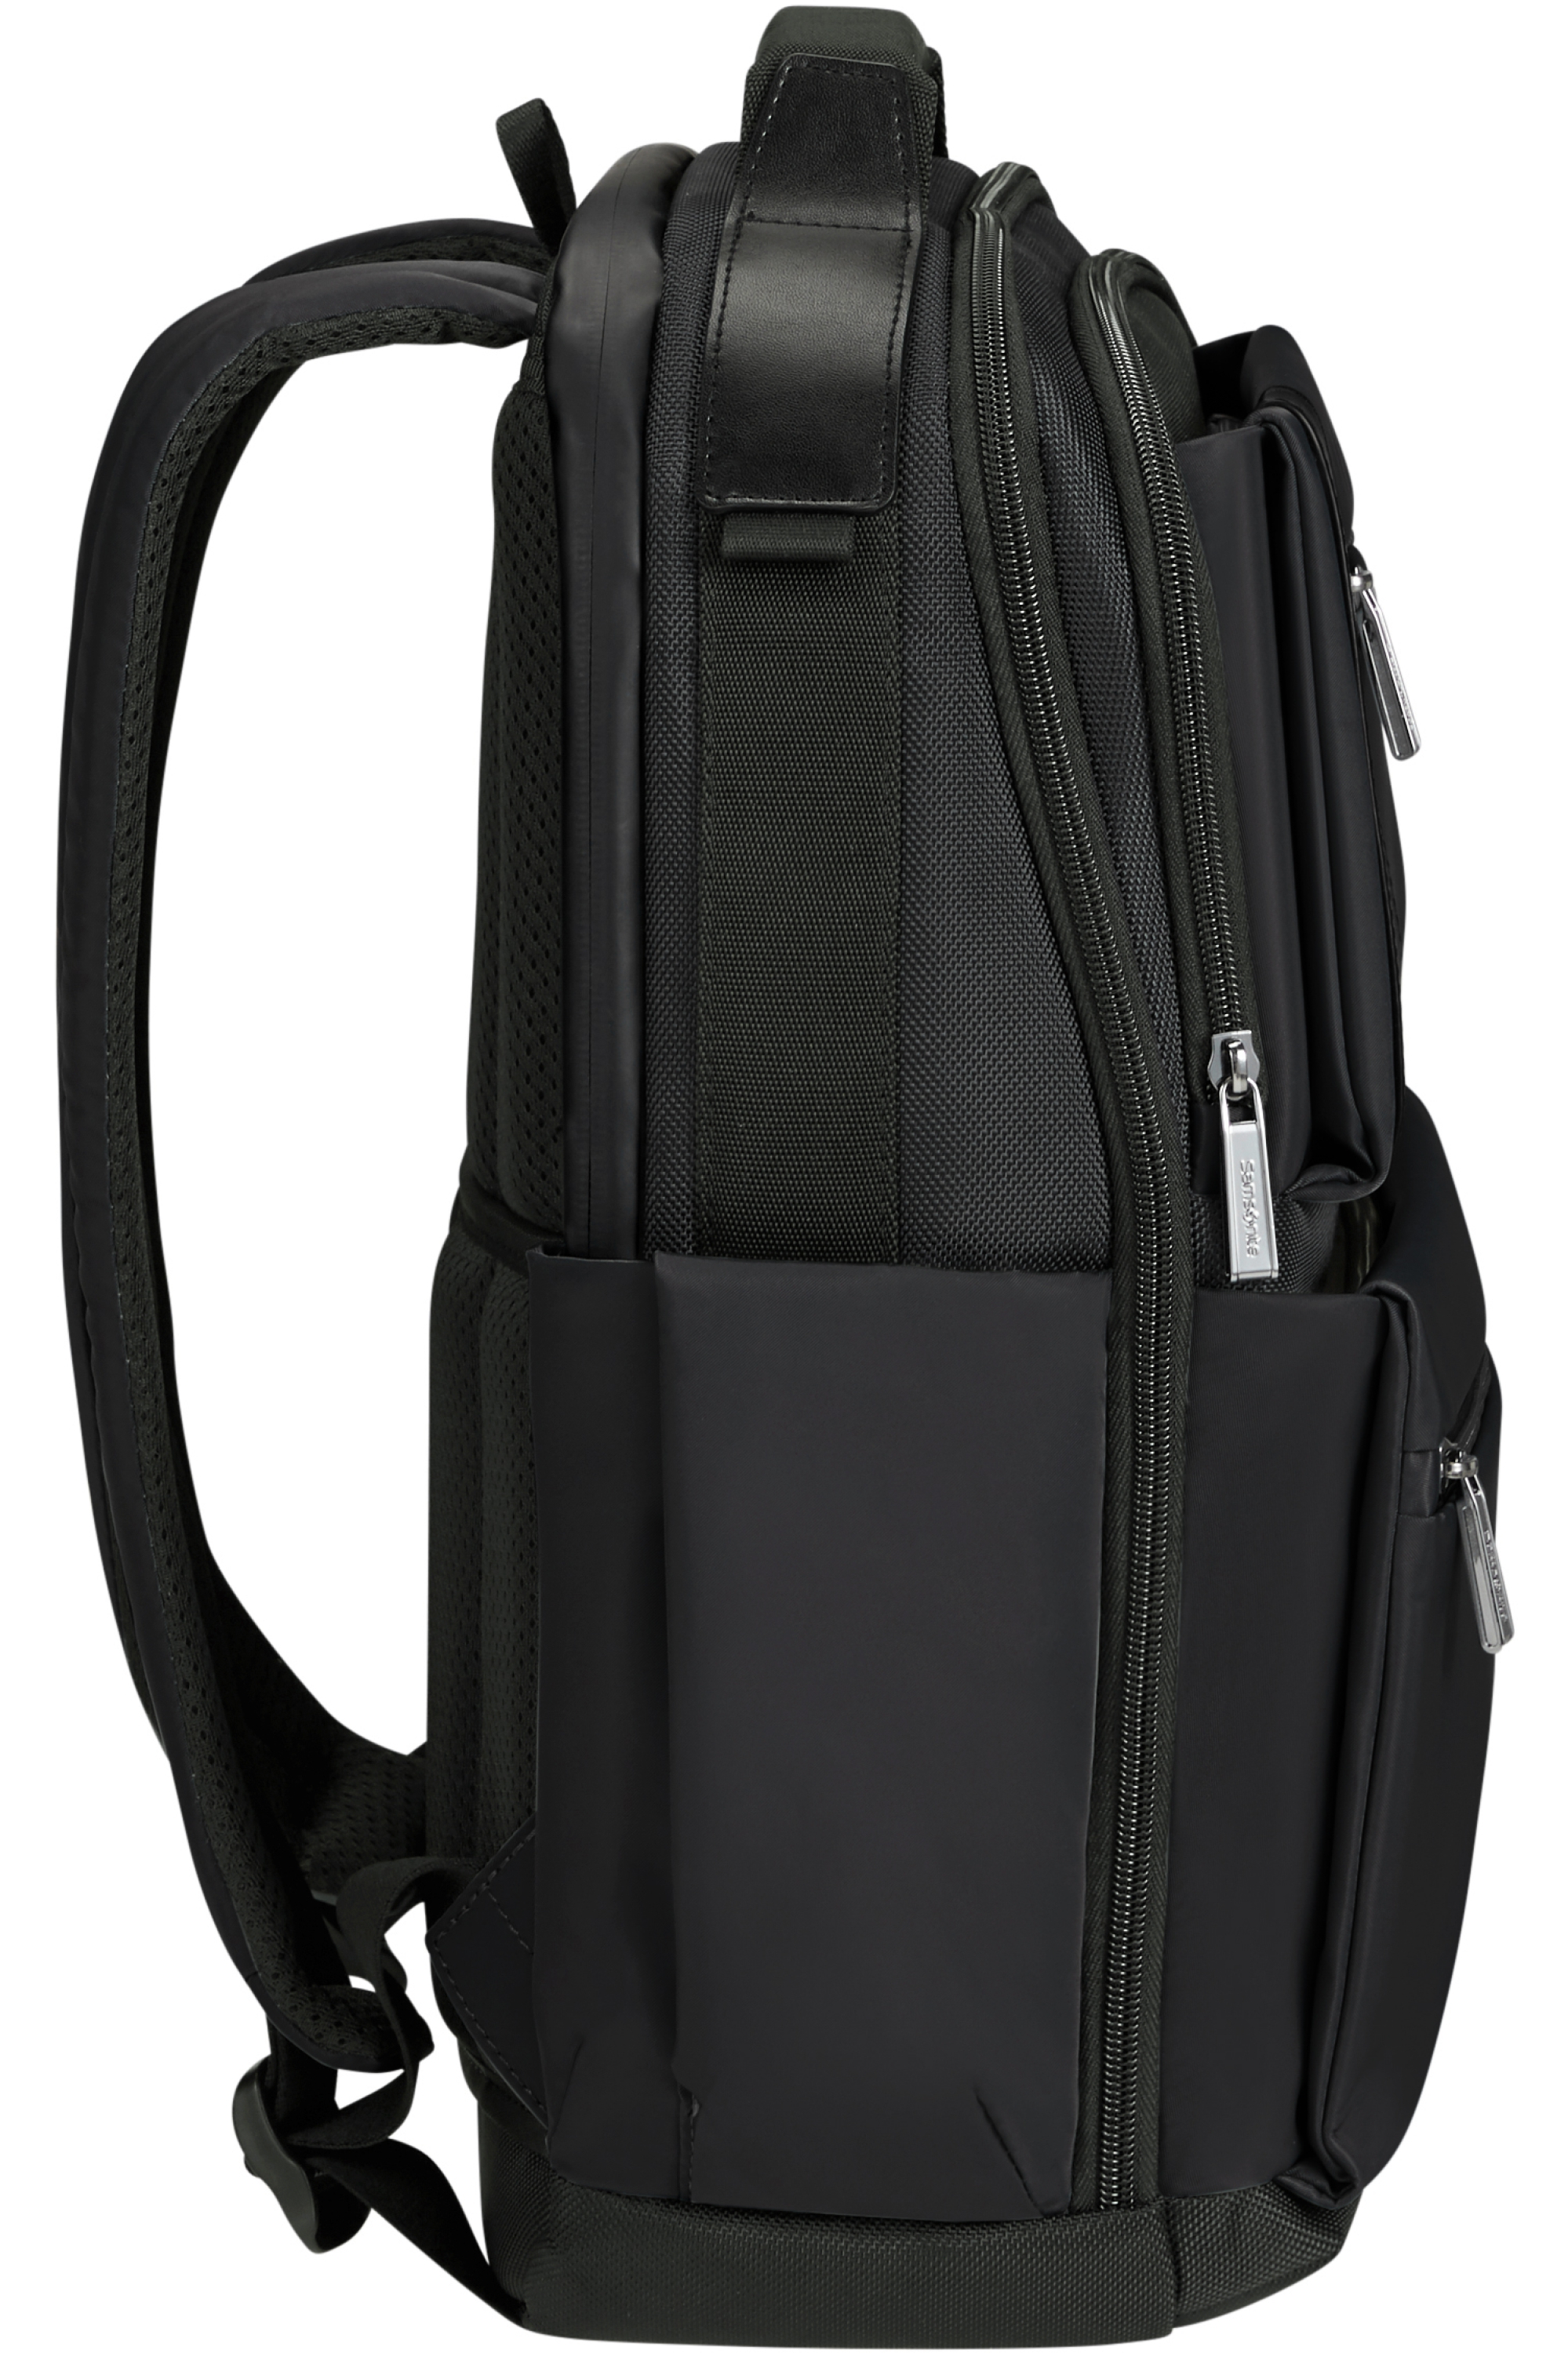 137207-1041-137207_1041_openroad_2-0_laptop_backpack_14-1_side-6f4547d6-cd92-446d-bc3b-ac8a00d4a598-png